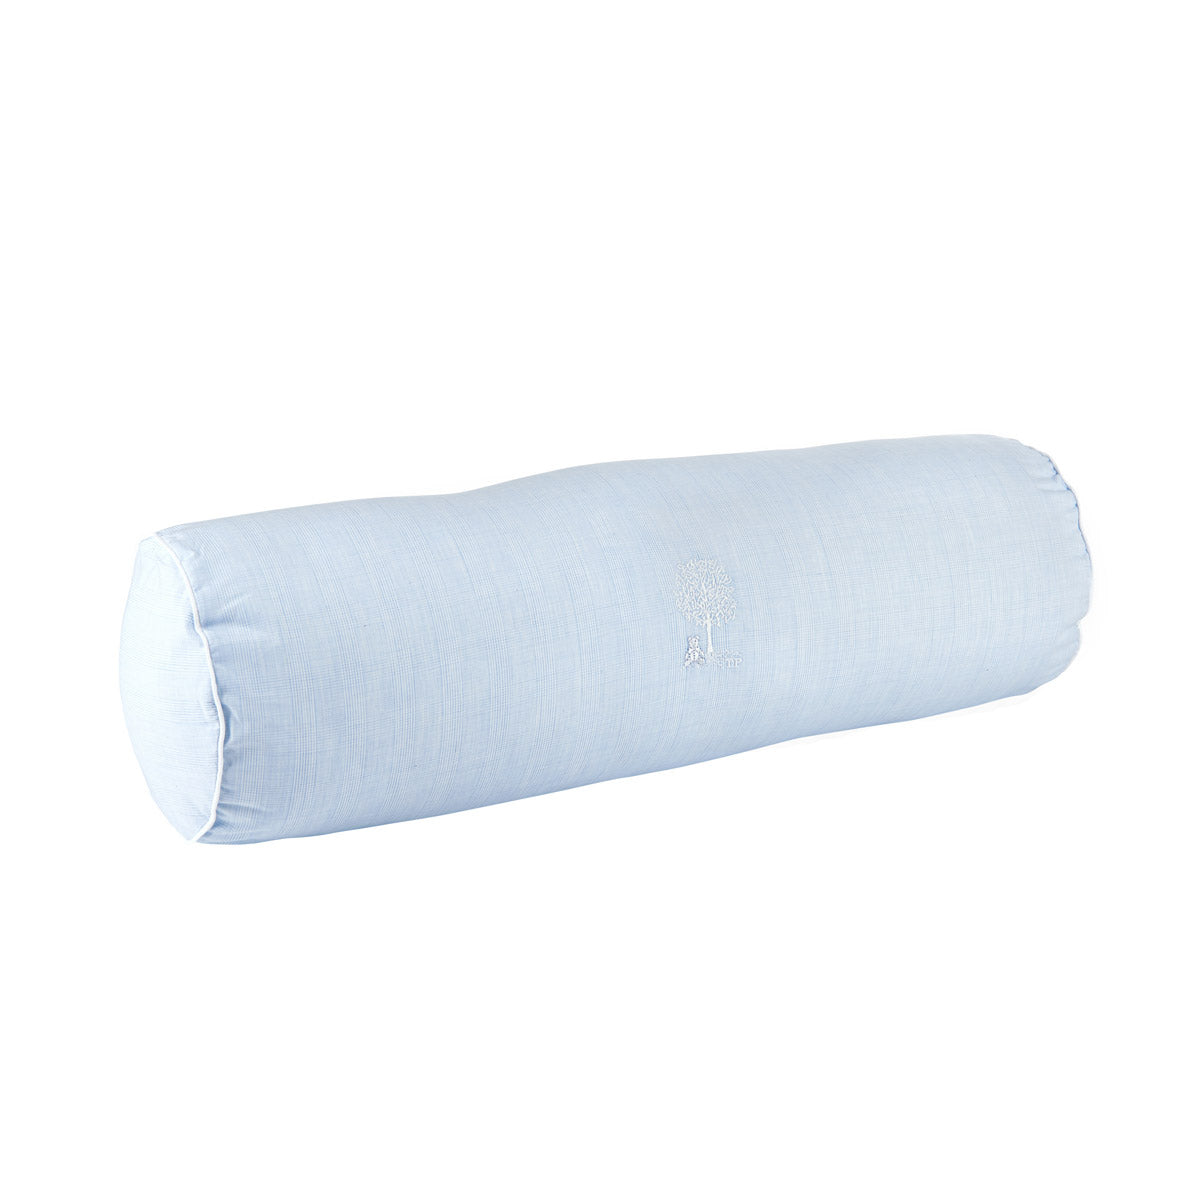 Theophile & Patachou Baby Bolster - Sweet Blue